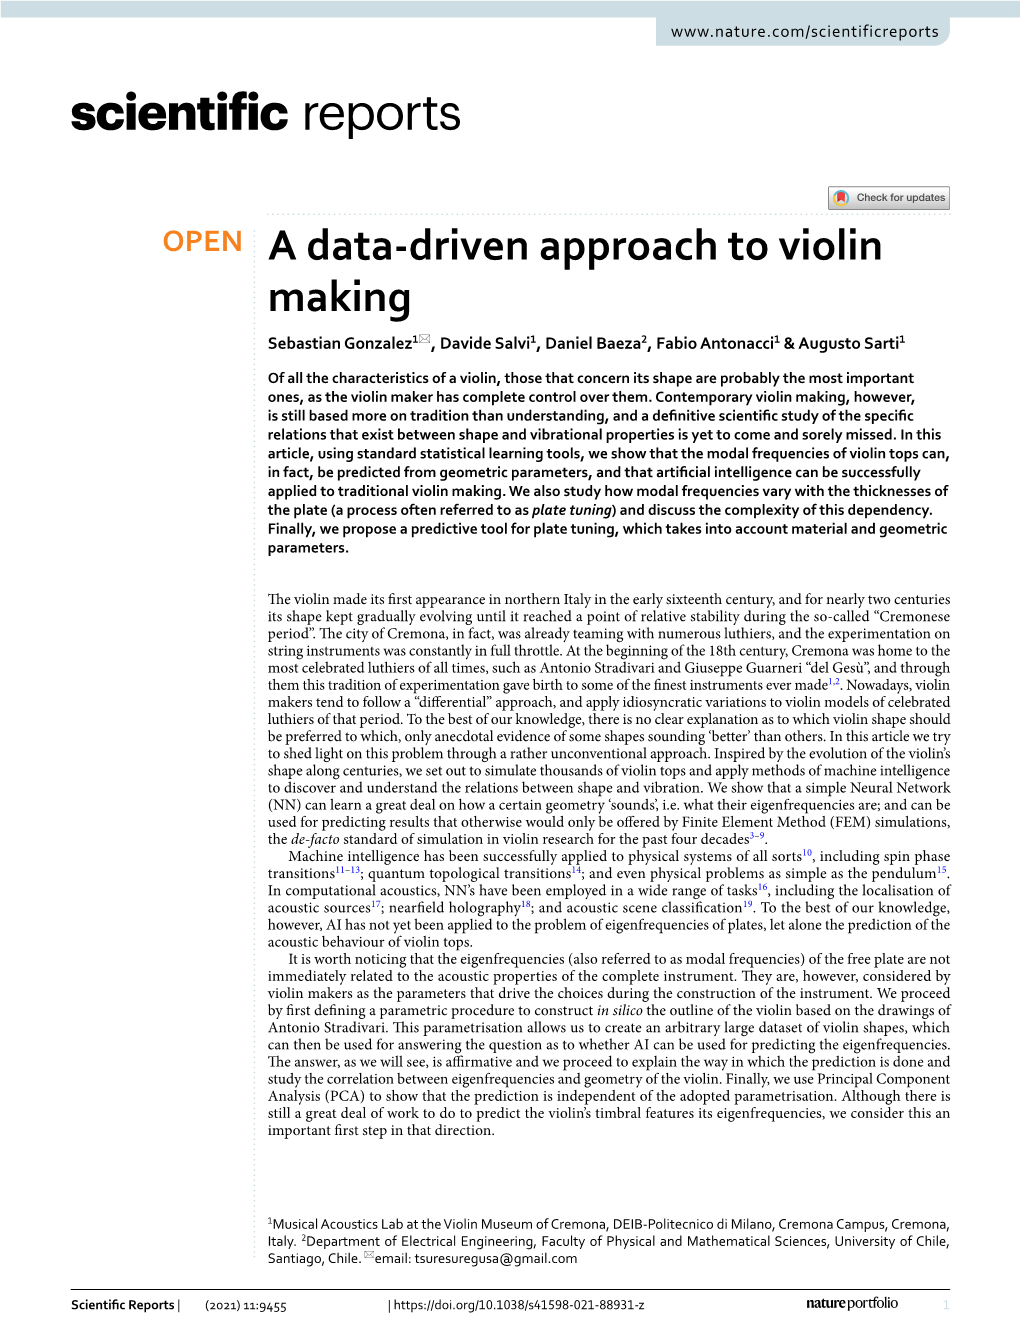 A Data-Driven Approach to Violin Making